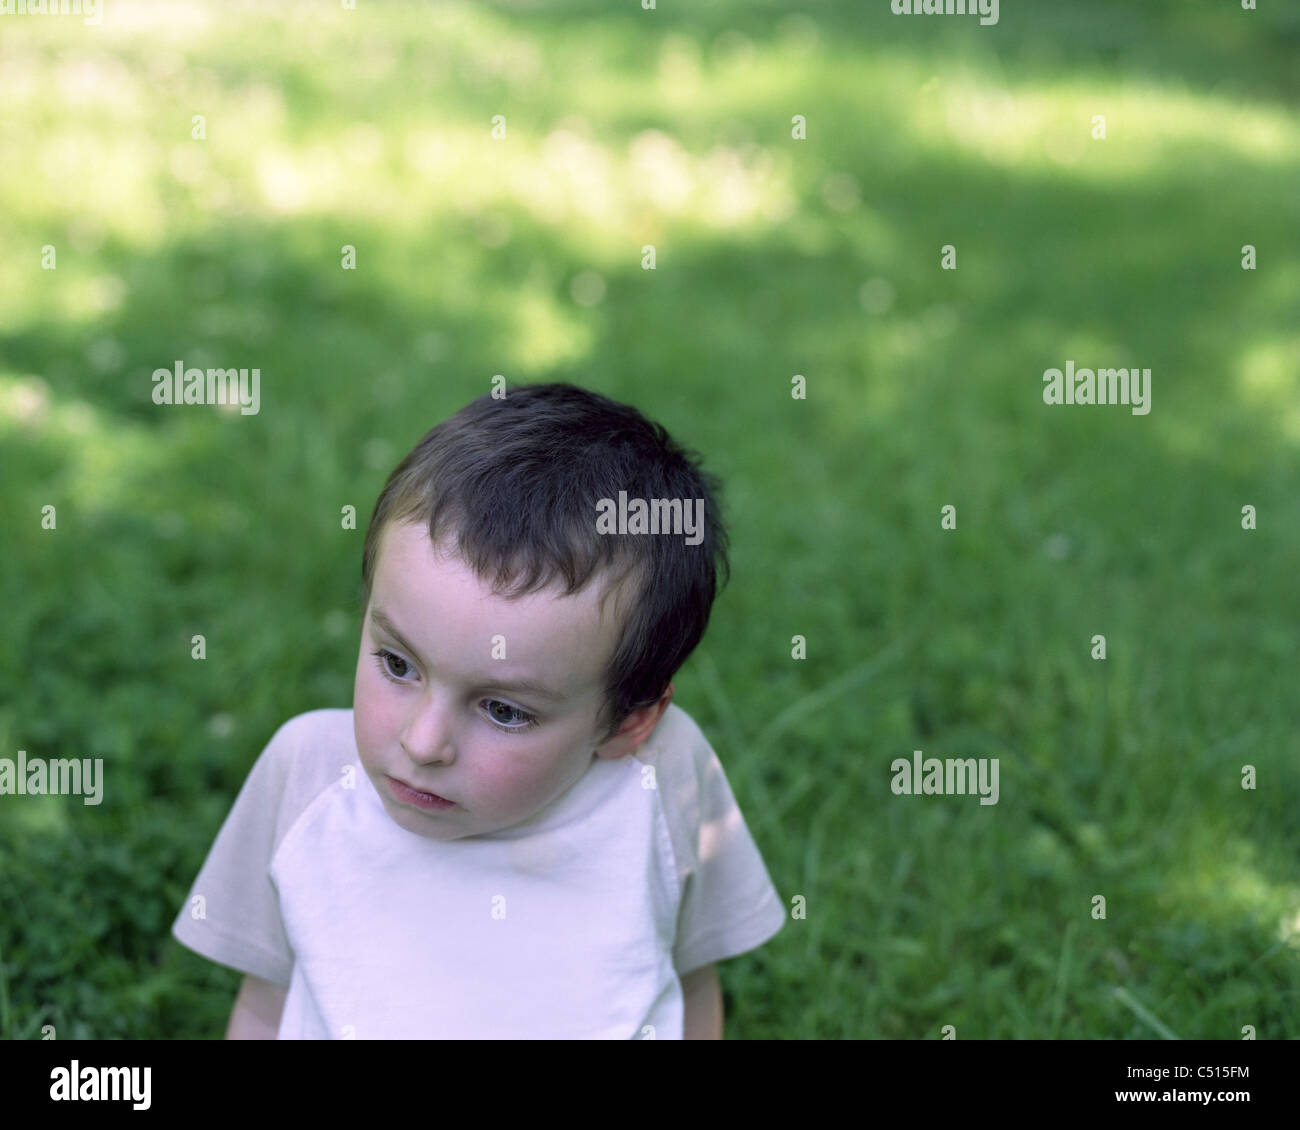 Little boy sitting in grass, looking away in thought Stock Photo